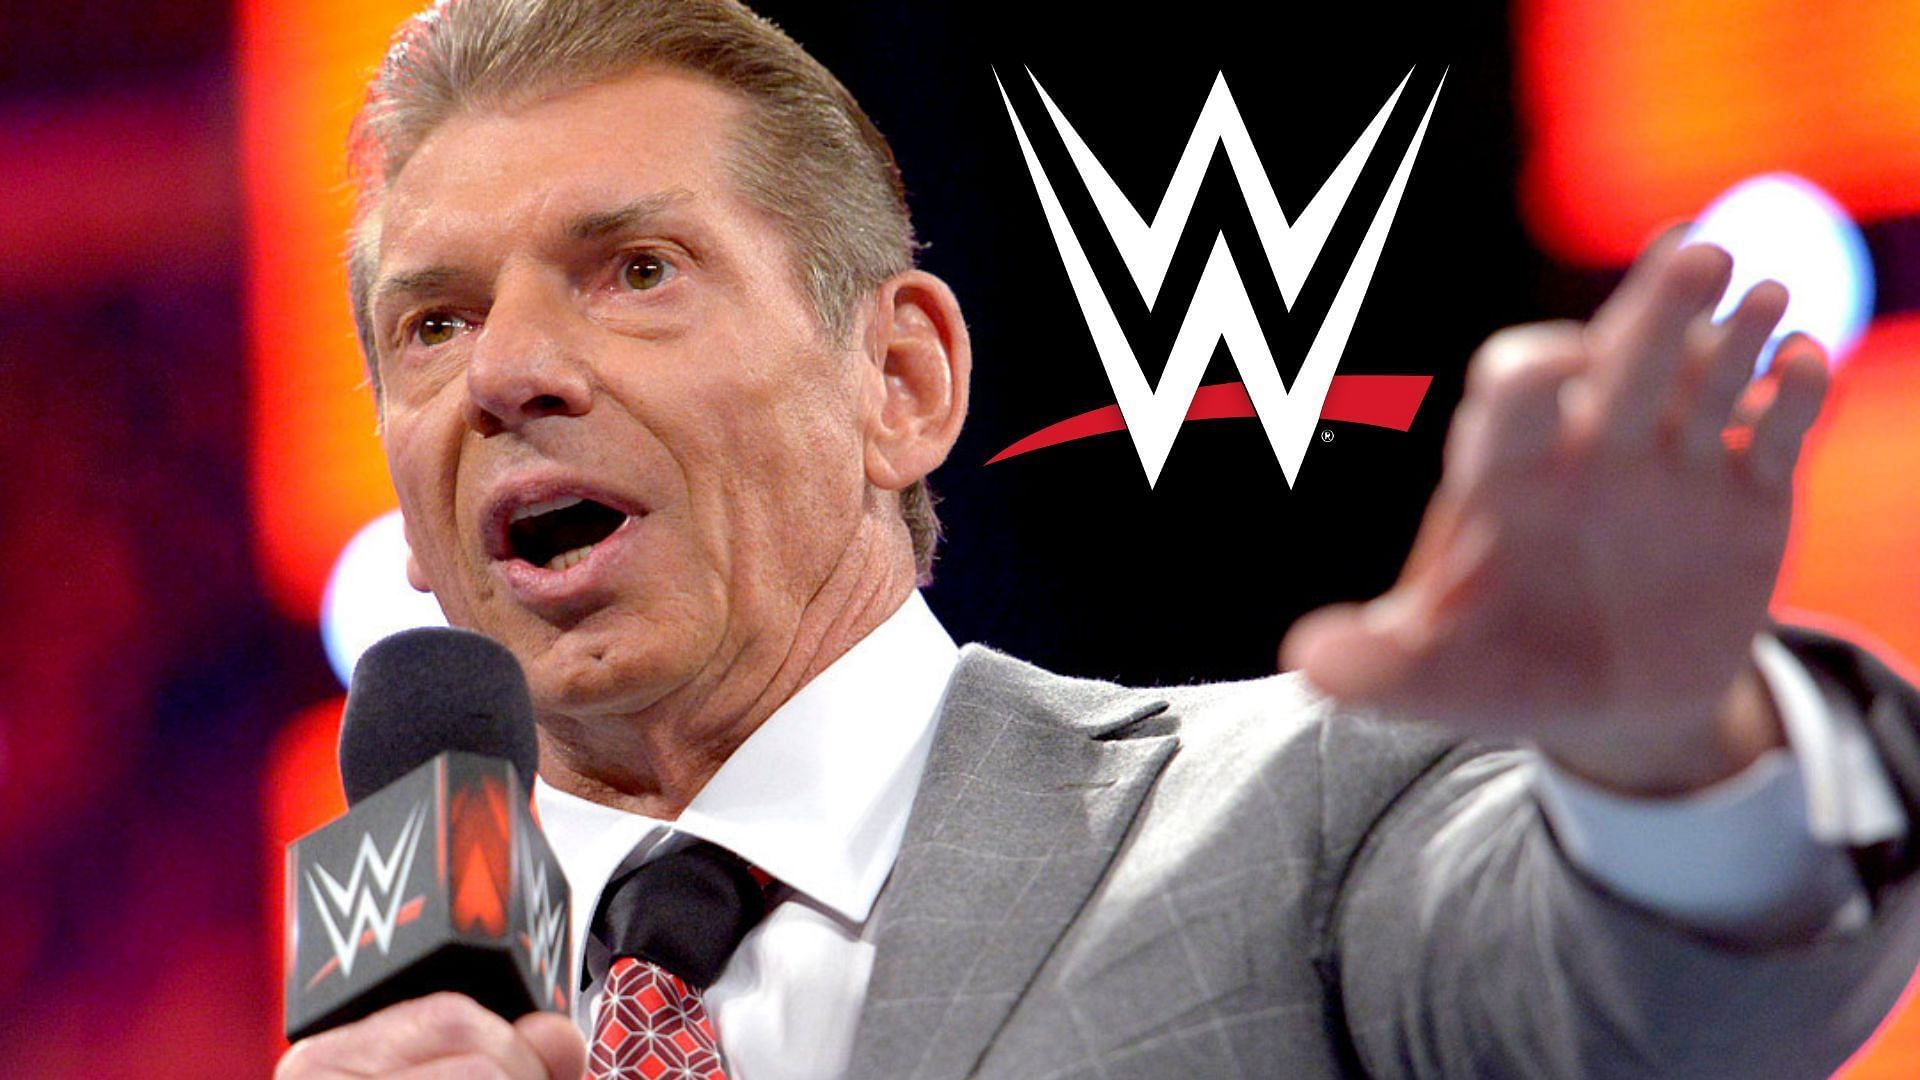 Vince McMahon does not want his biopic made